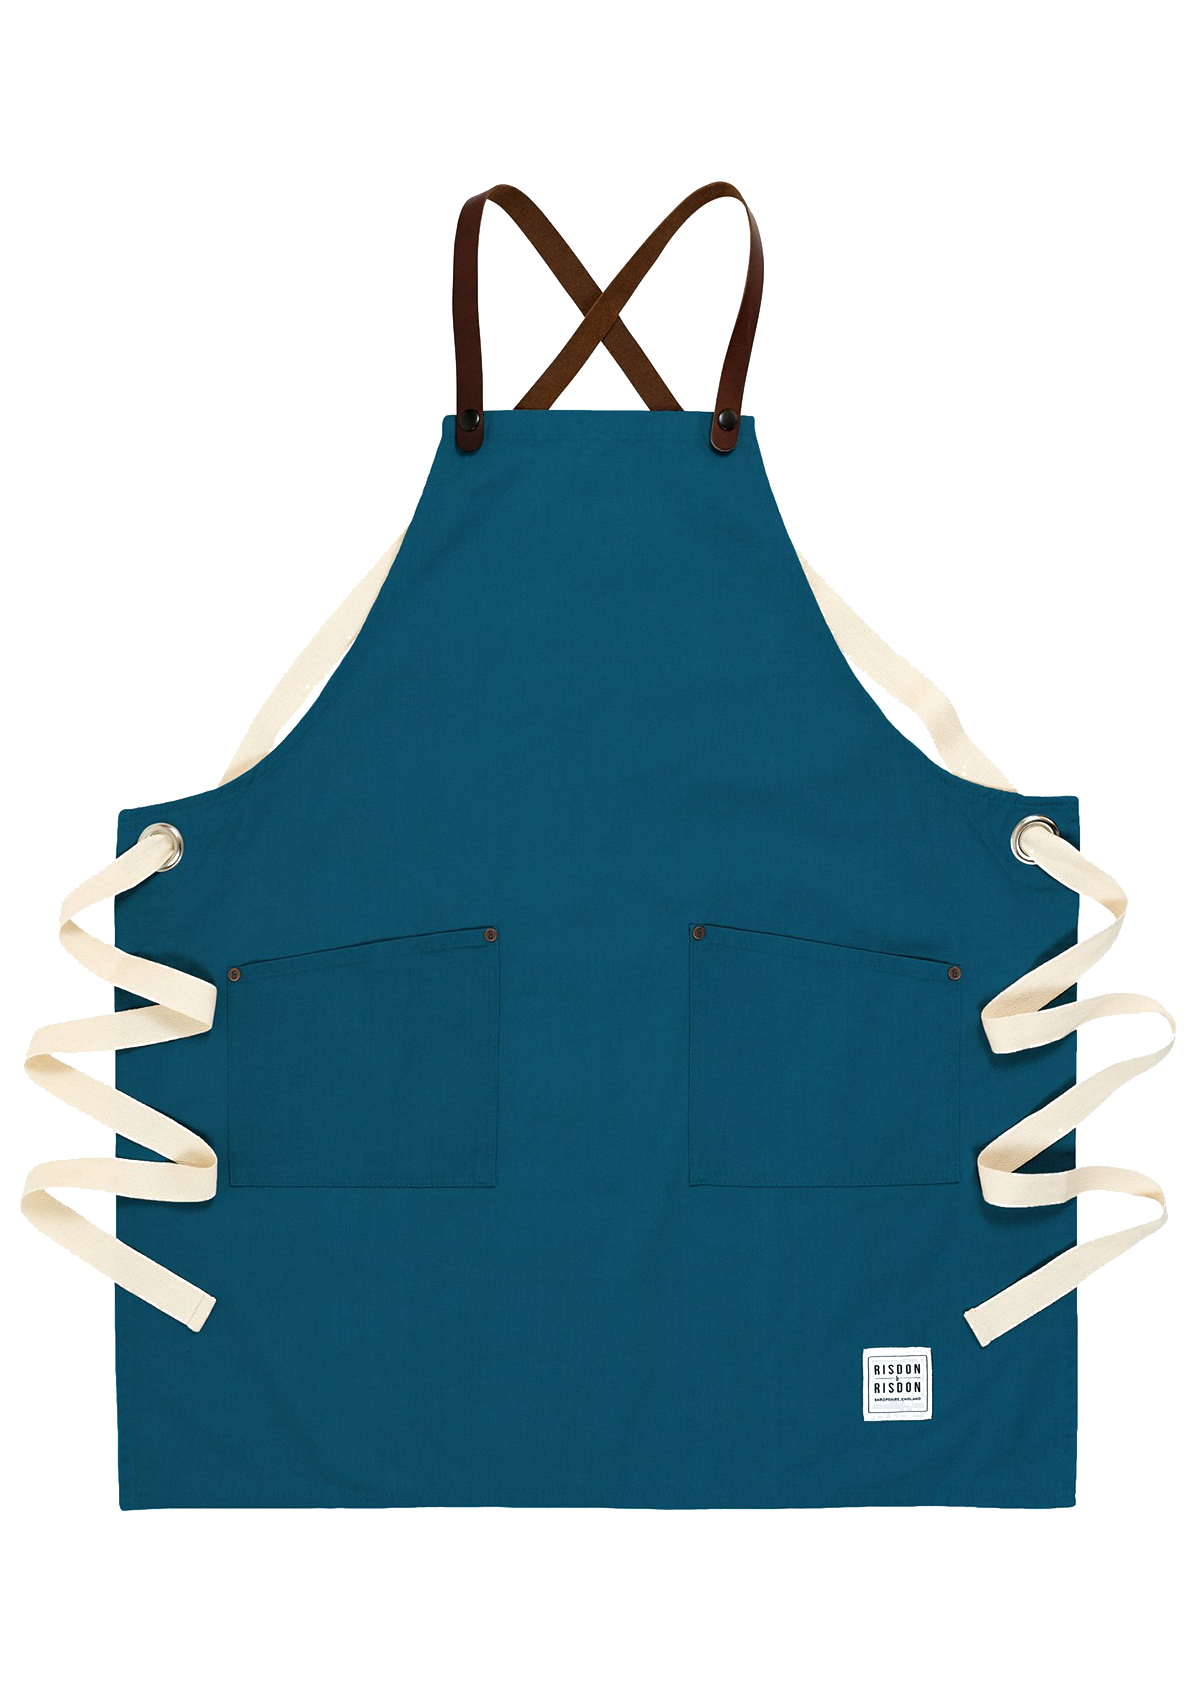 Handcrafted Apron Studio with Leather Straps Unisex